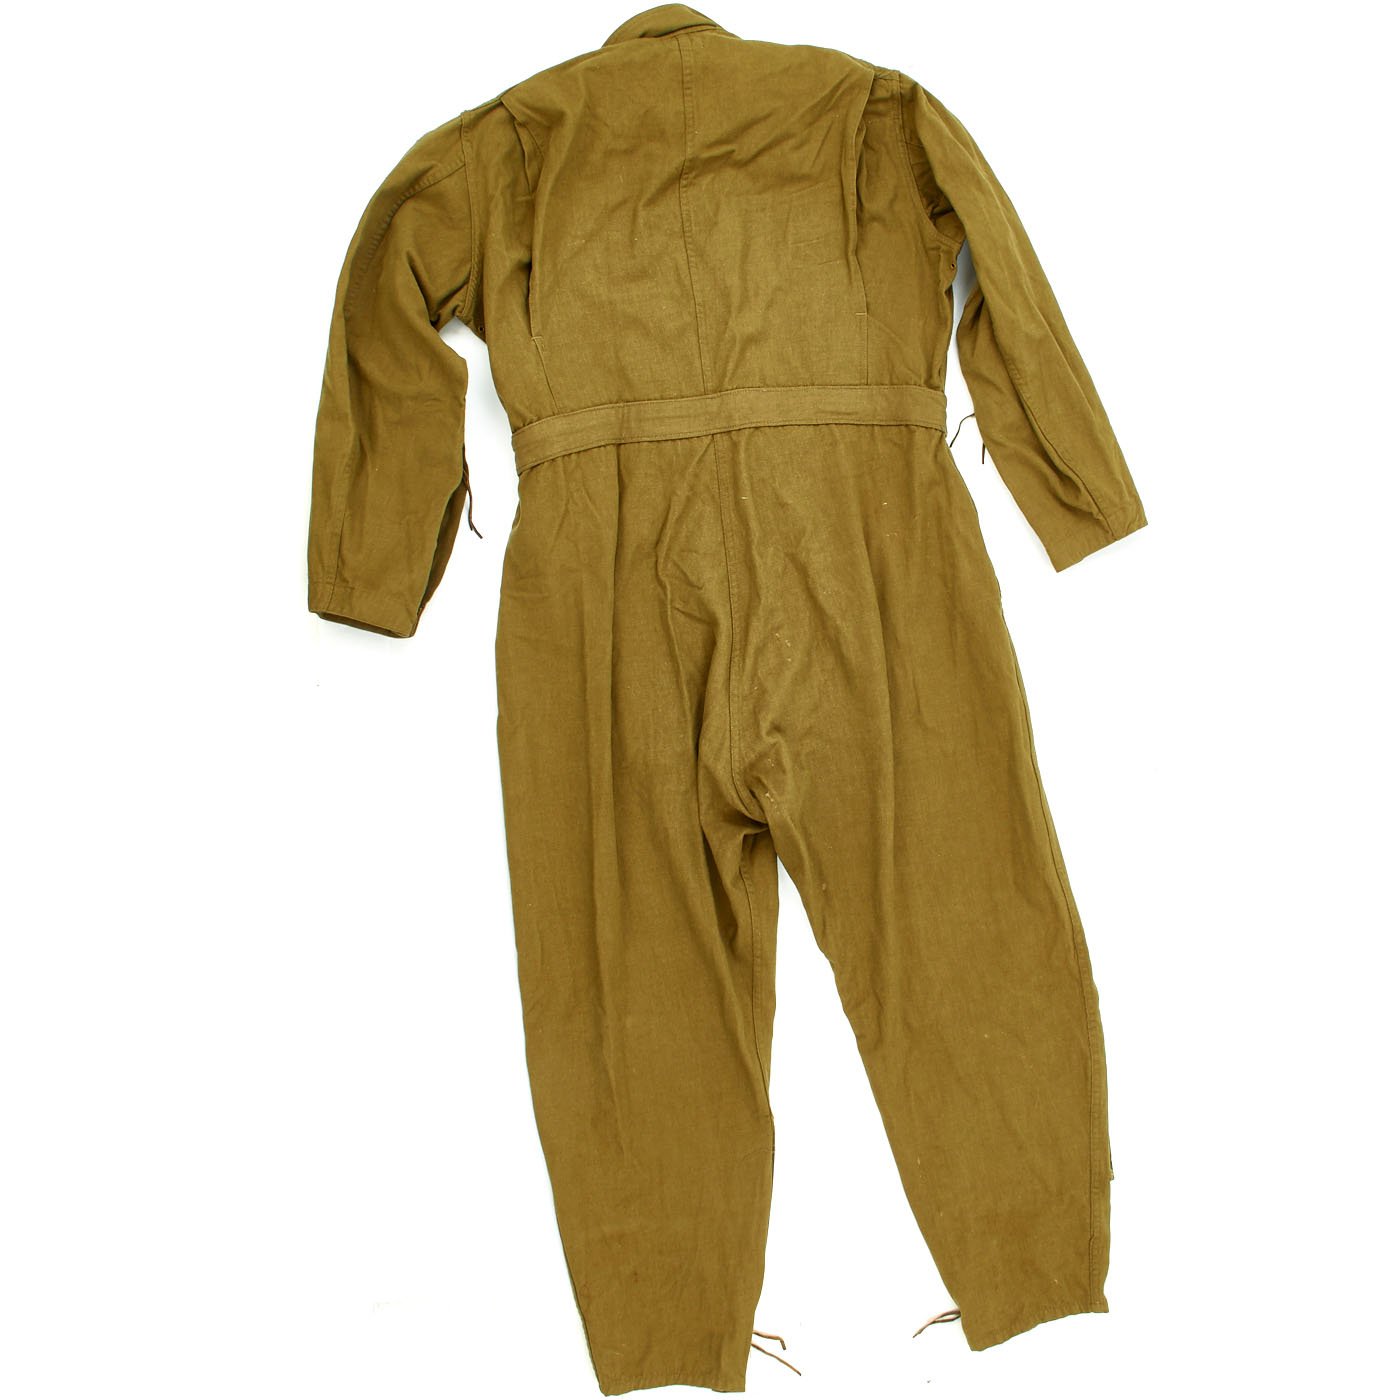 U.S. WWII Army Air Force Summer Type A-4 Flight Suit with Leather ...